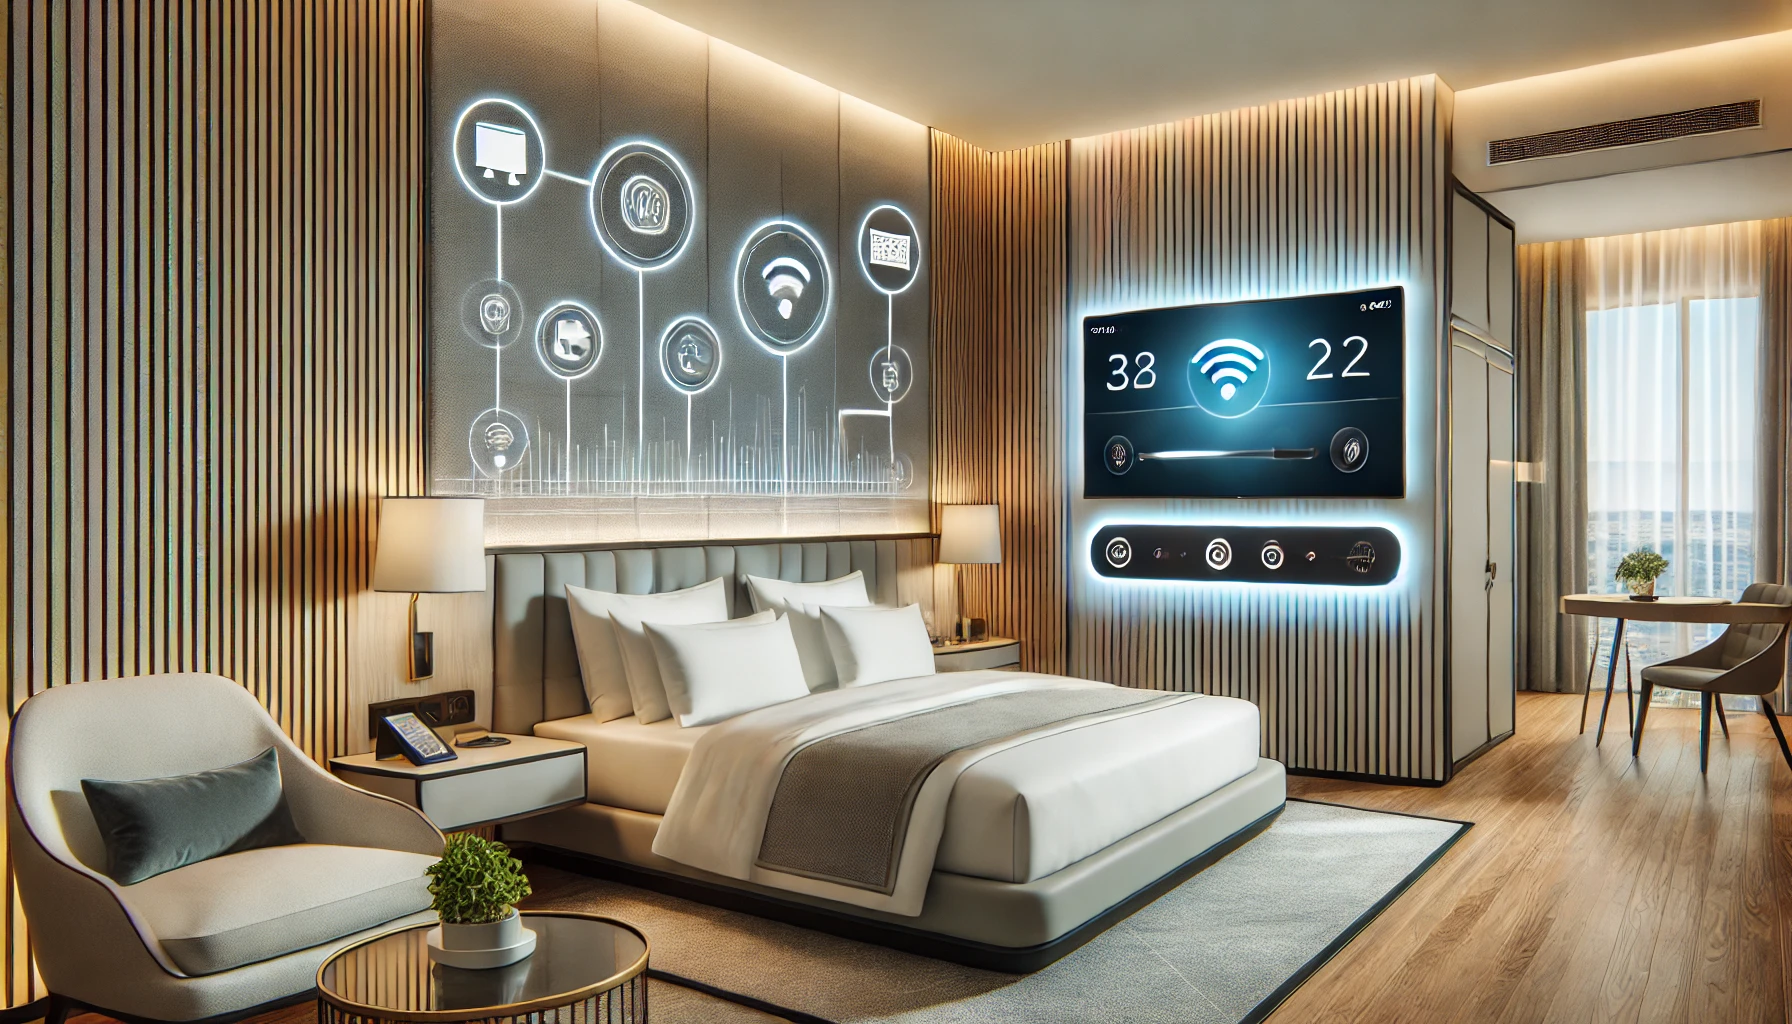 PMS Manager Hotel: Hospitality Management System of the Future